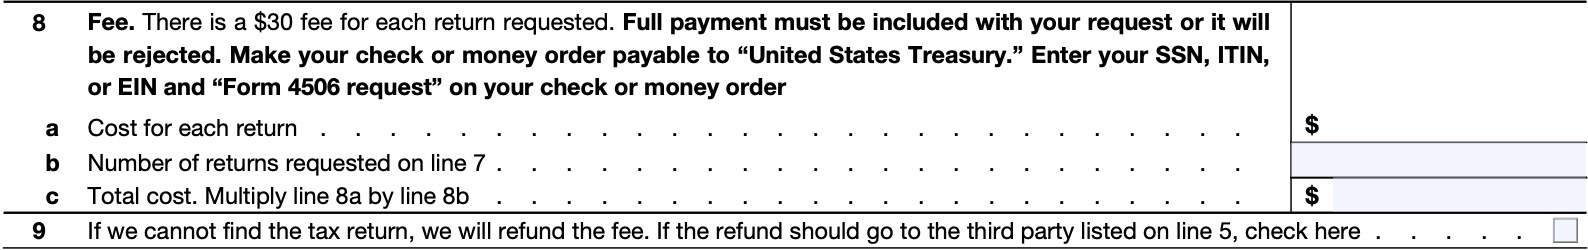 irs form 4506, lines 8 & 9